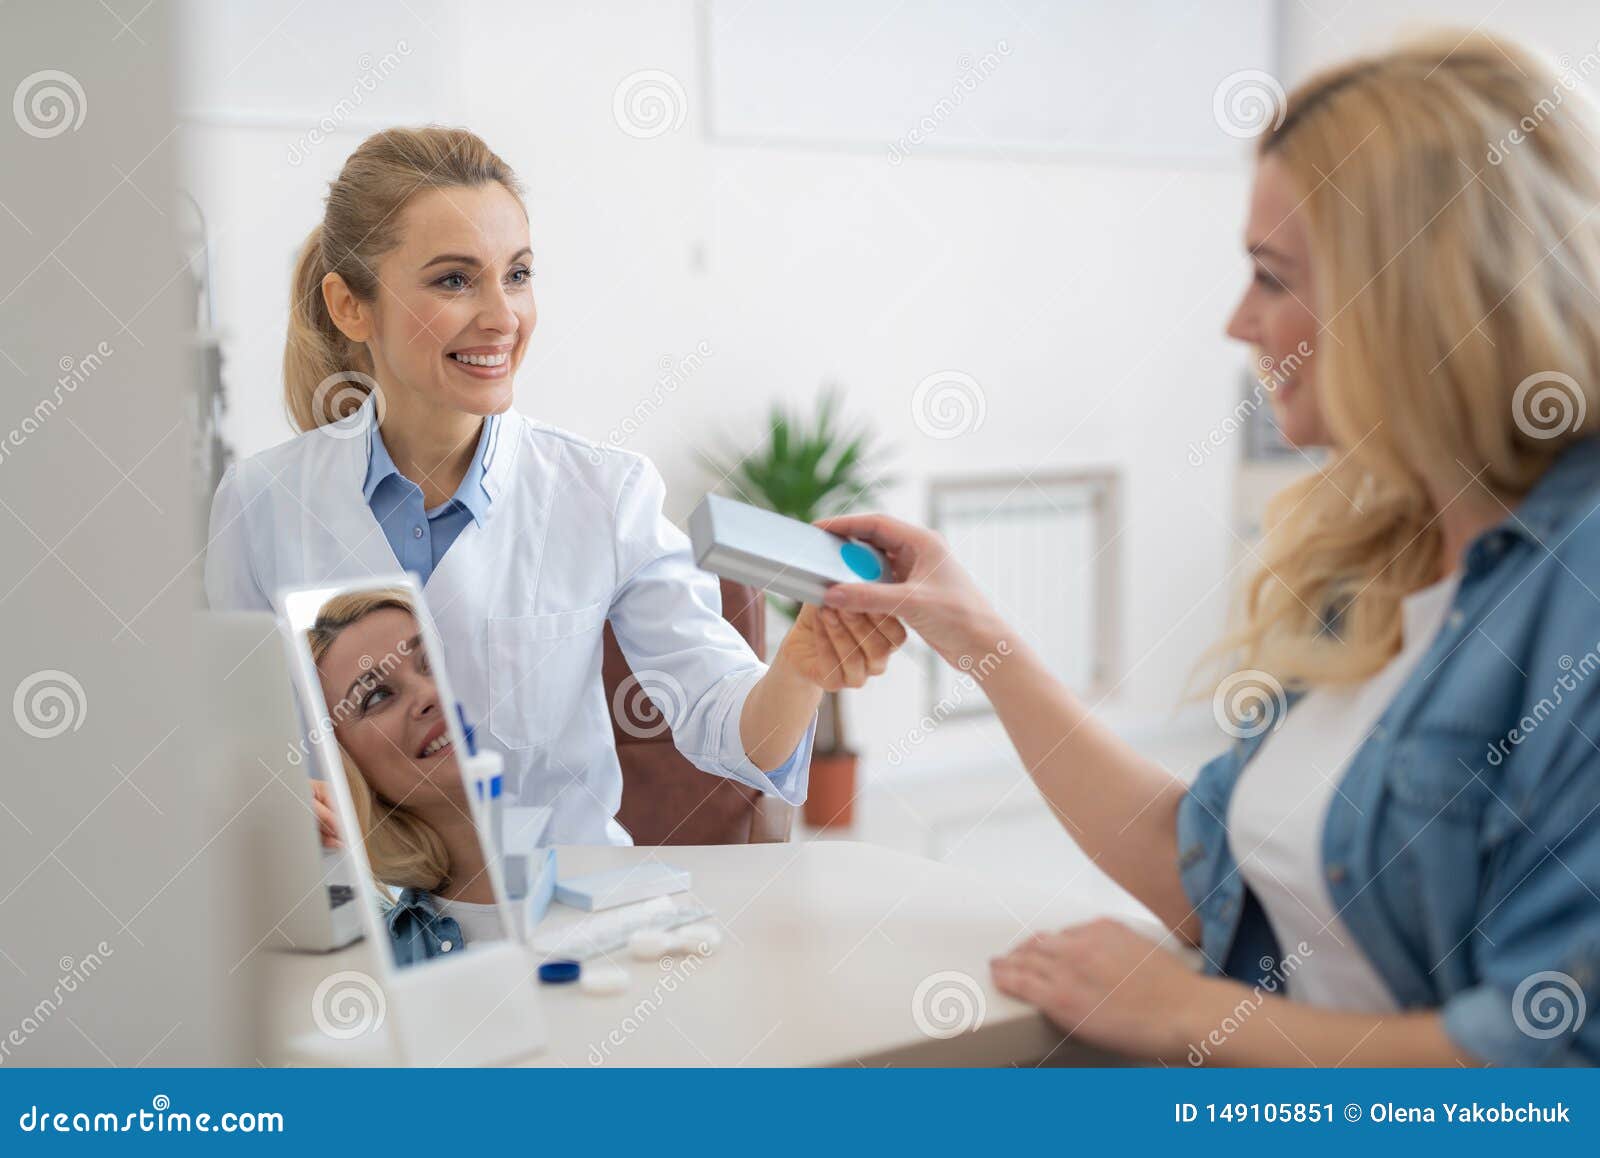 friendly ophthalmologist in white lab coat prescribing contact lenses for blond lady